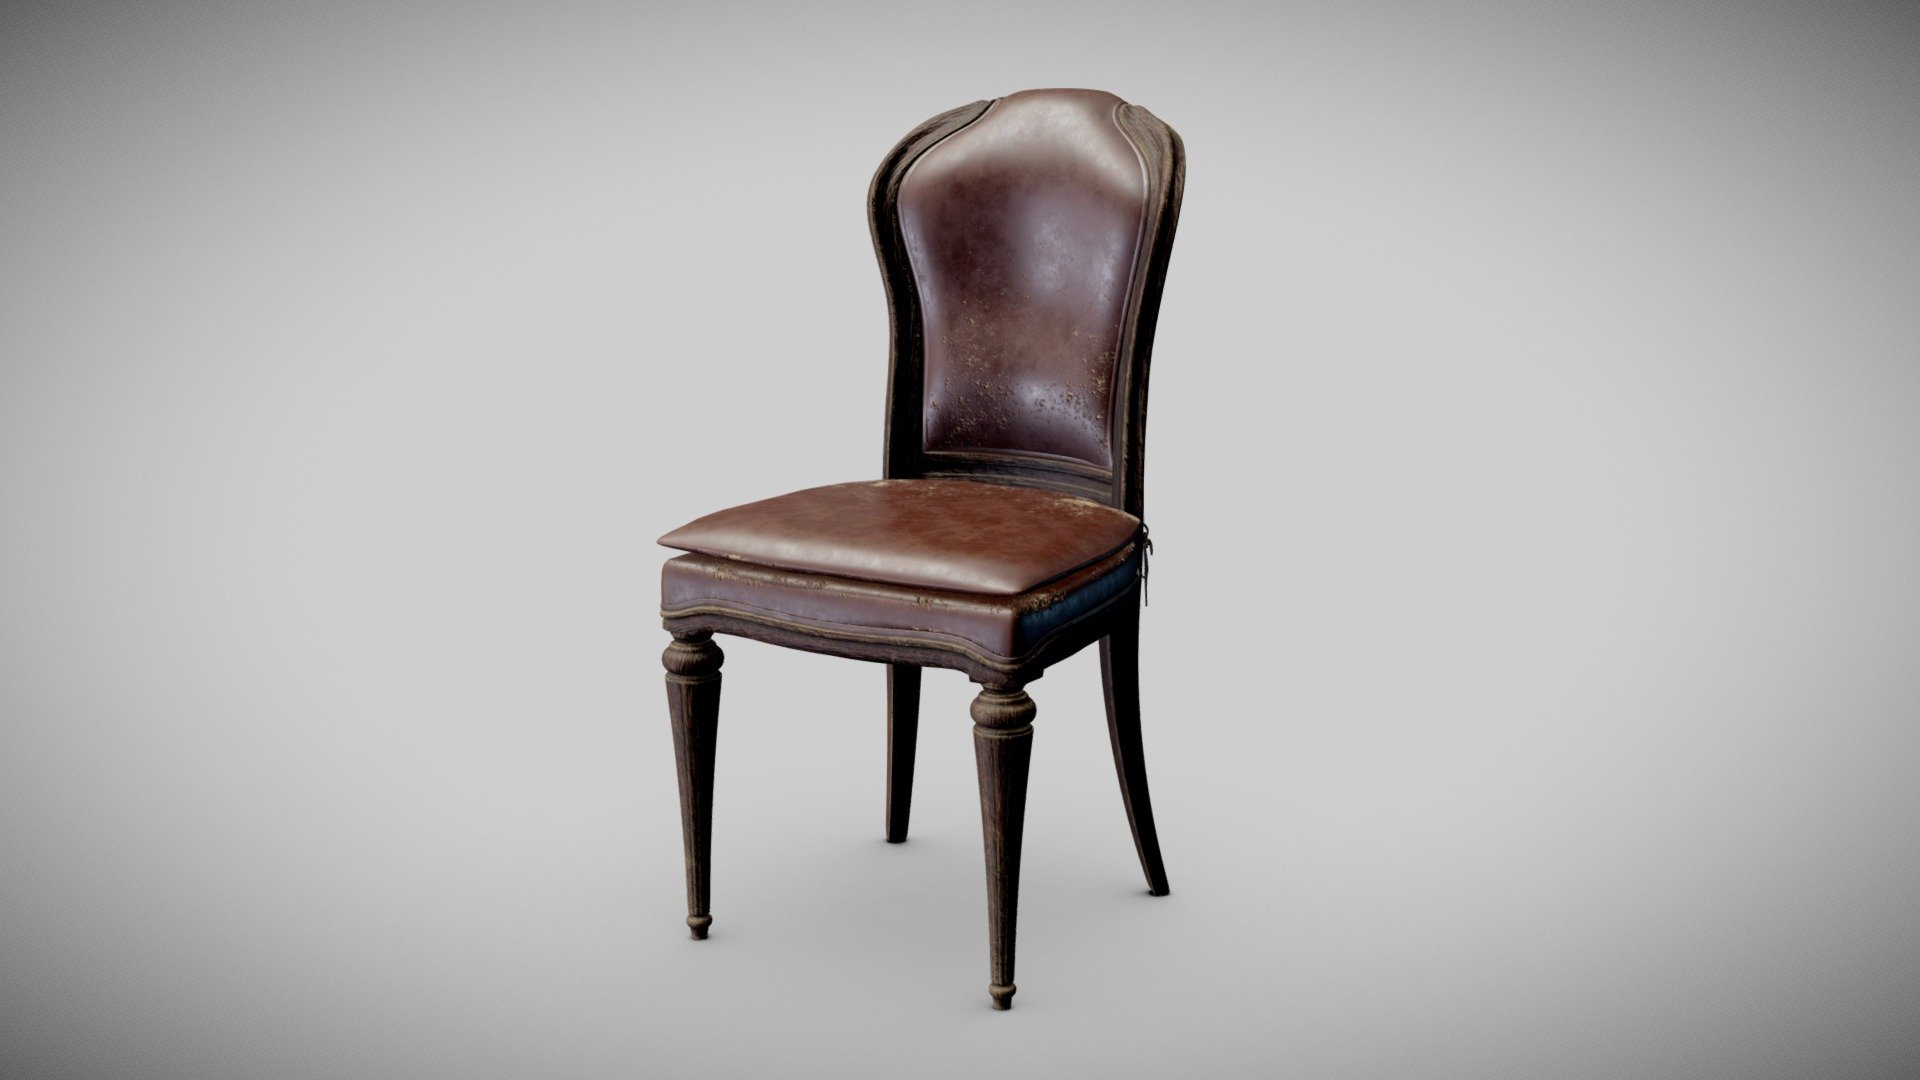 Model of an antique handmade wooden chair after the kind my grandparents had when I was a child, Maya+ substance painter+ zbrush - Antique dining chair - Buy Royalty Free 3D model by Mehrnaz (@mehrnaz_a) 3d model